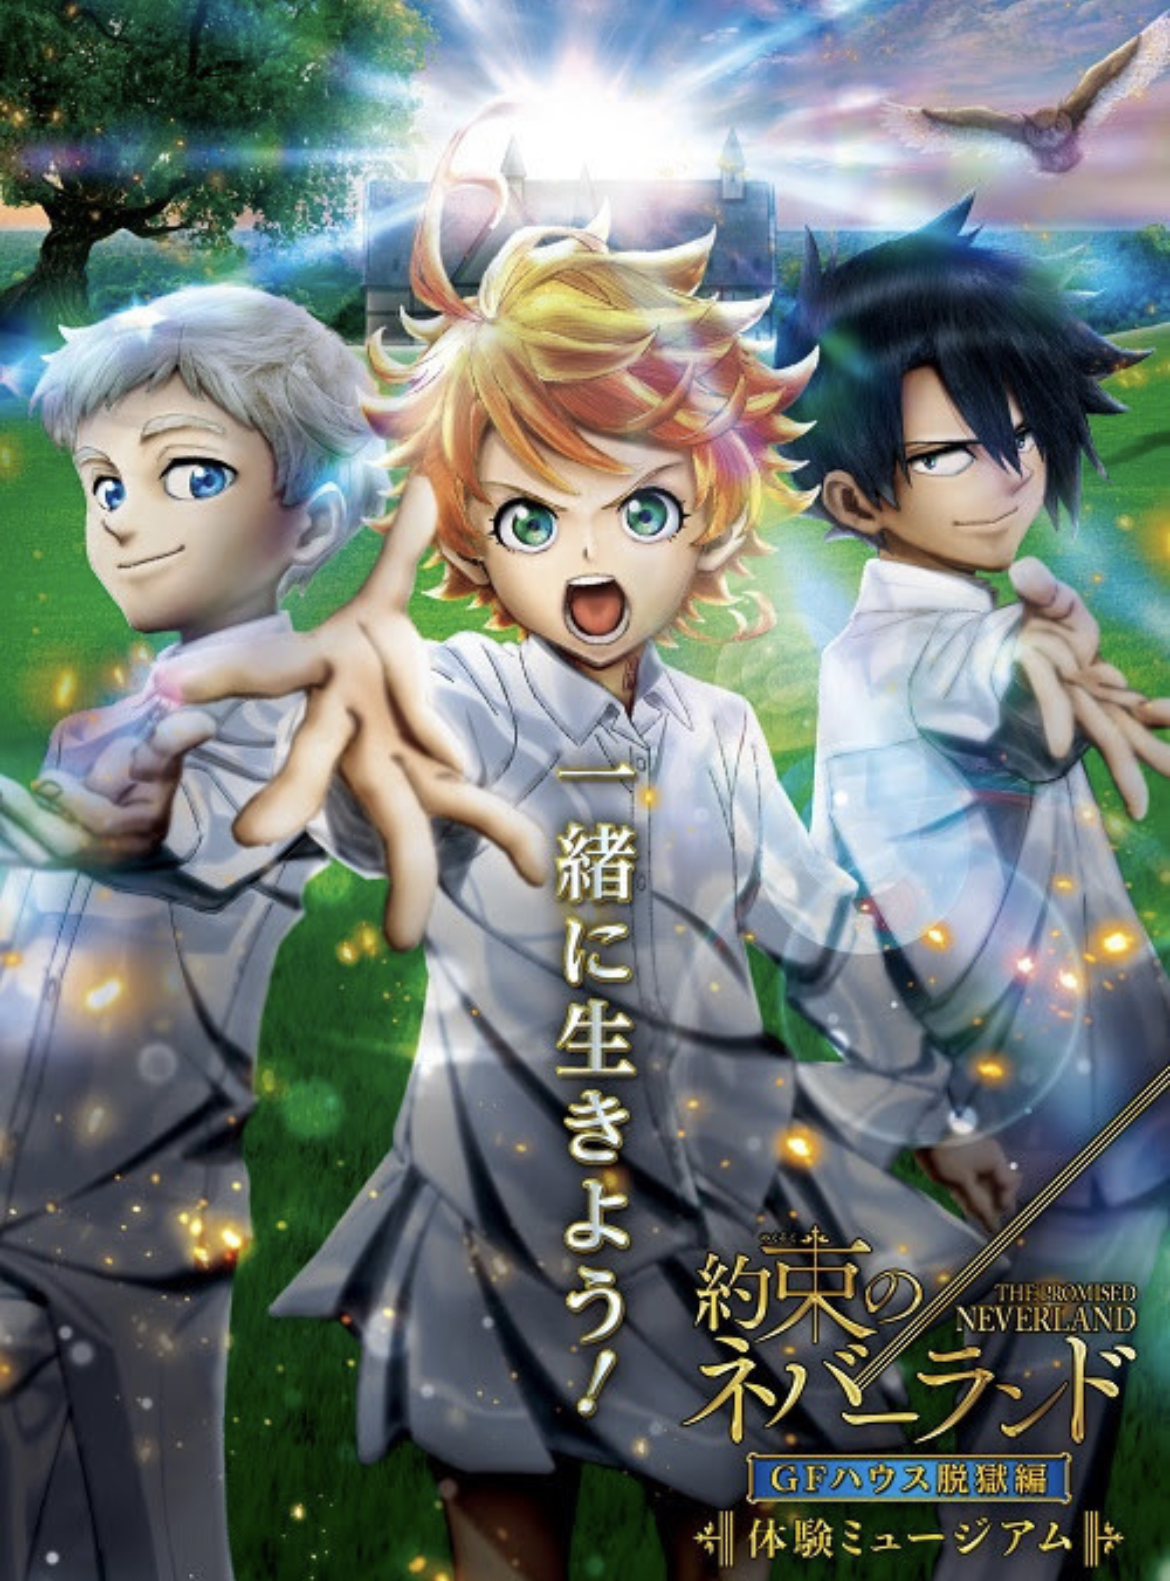 The Promised Neverland on X: The Promised Neverland anime has finally been  released on U.S. Netflix! Available in both Japanese & English. Stream  here:   / X